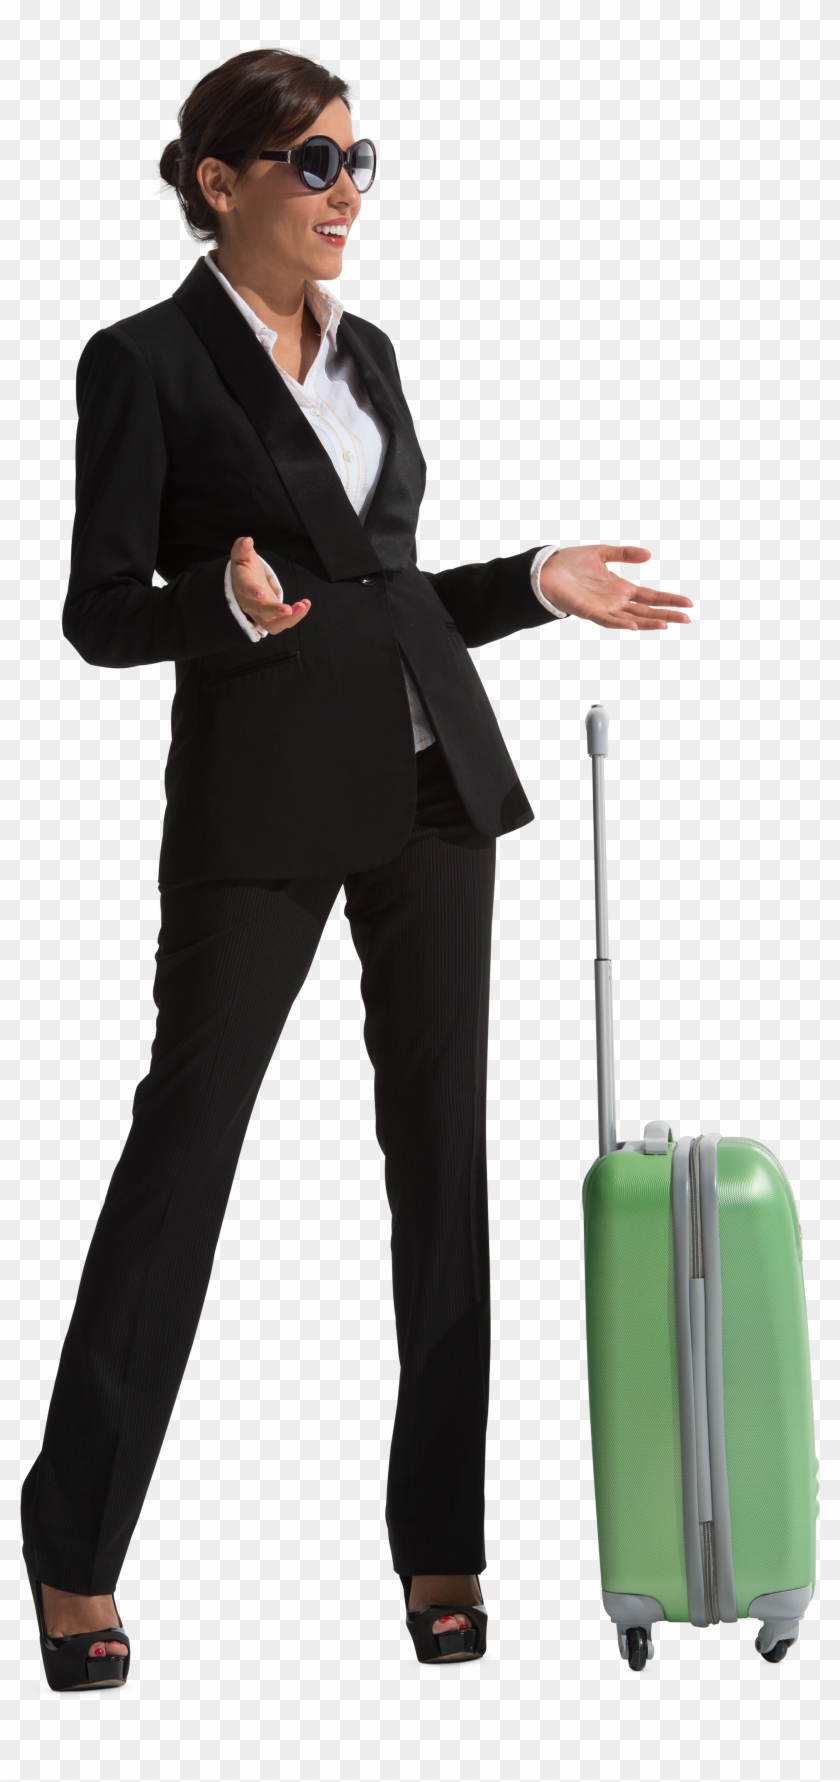 Free People Png Transparent Background - People With Suitcase Png Clipart